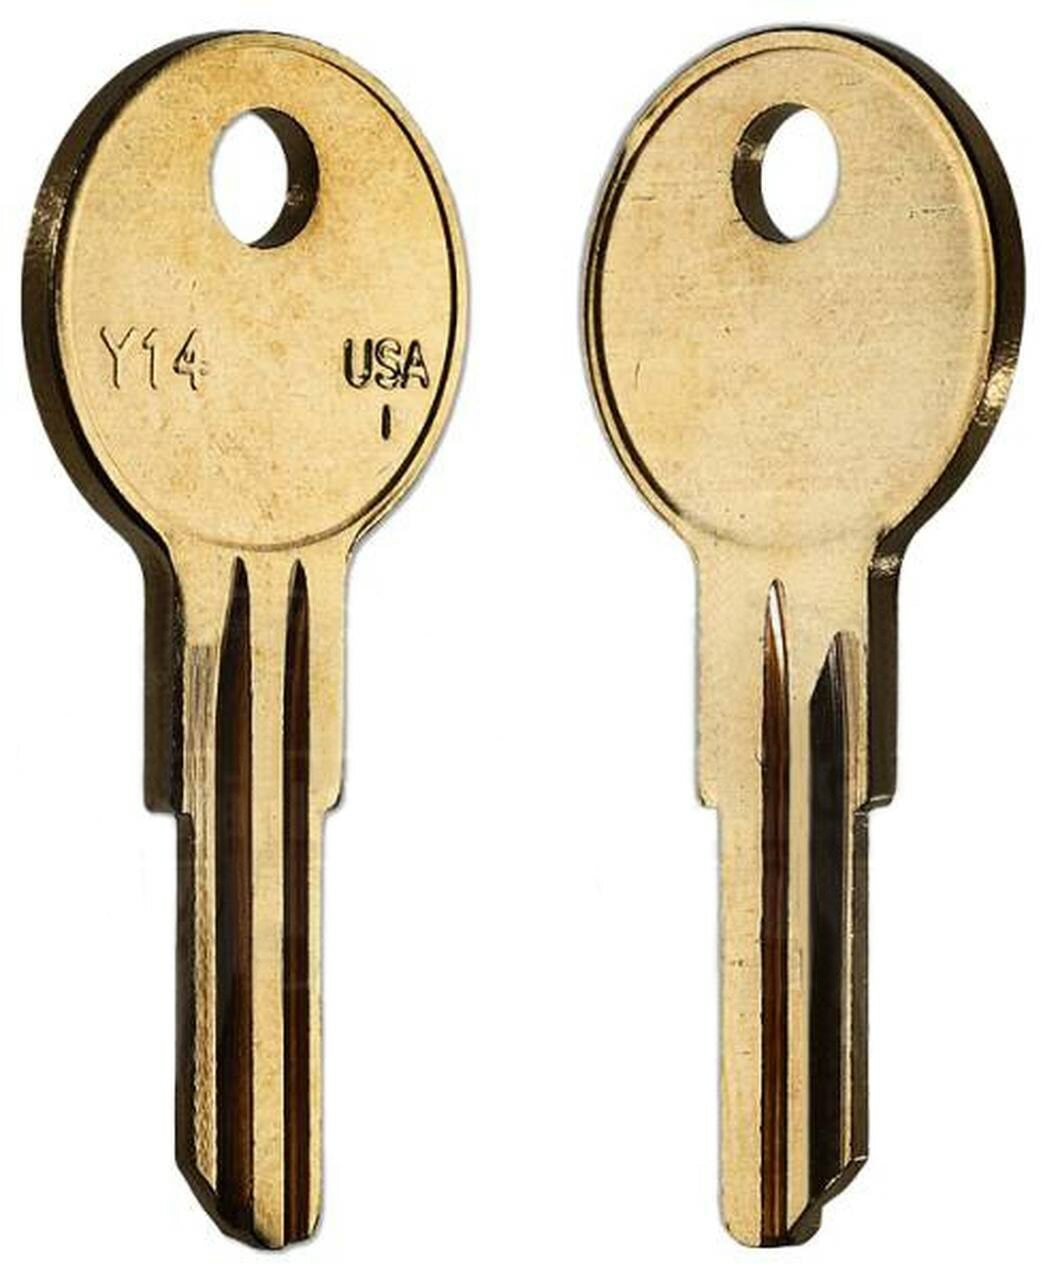 Y14-BR 34 – Cylinder Lock Key Blank, Natural Brass, 34 Price Group, For Yale